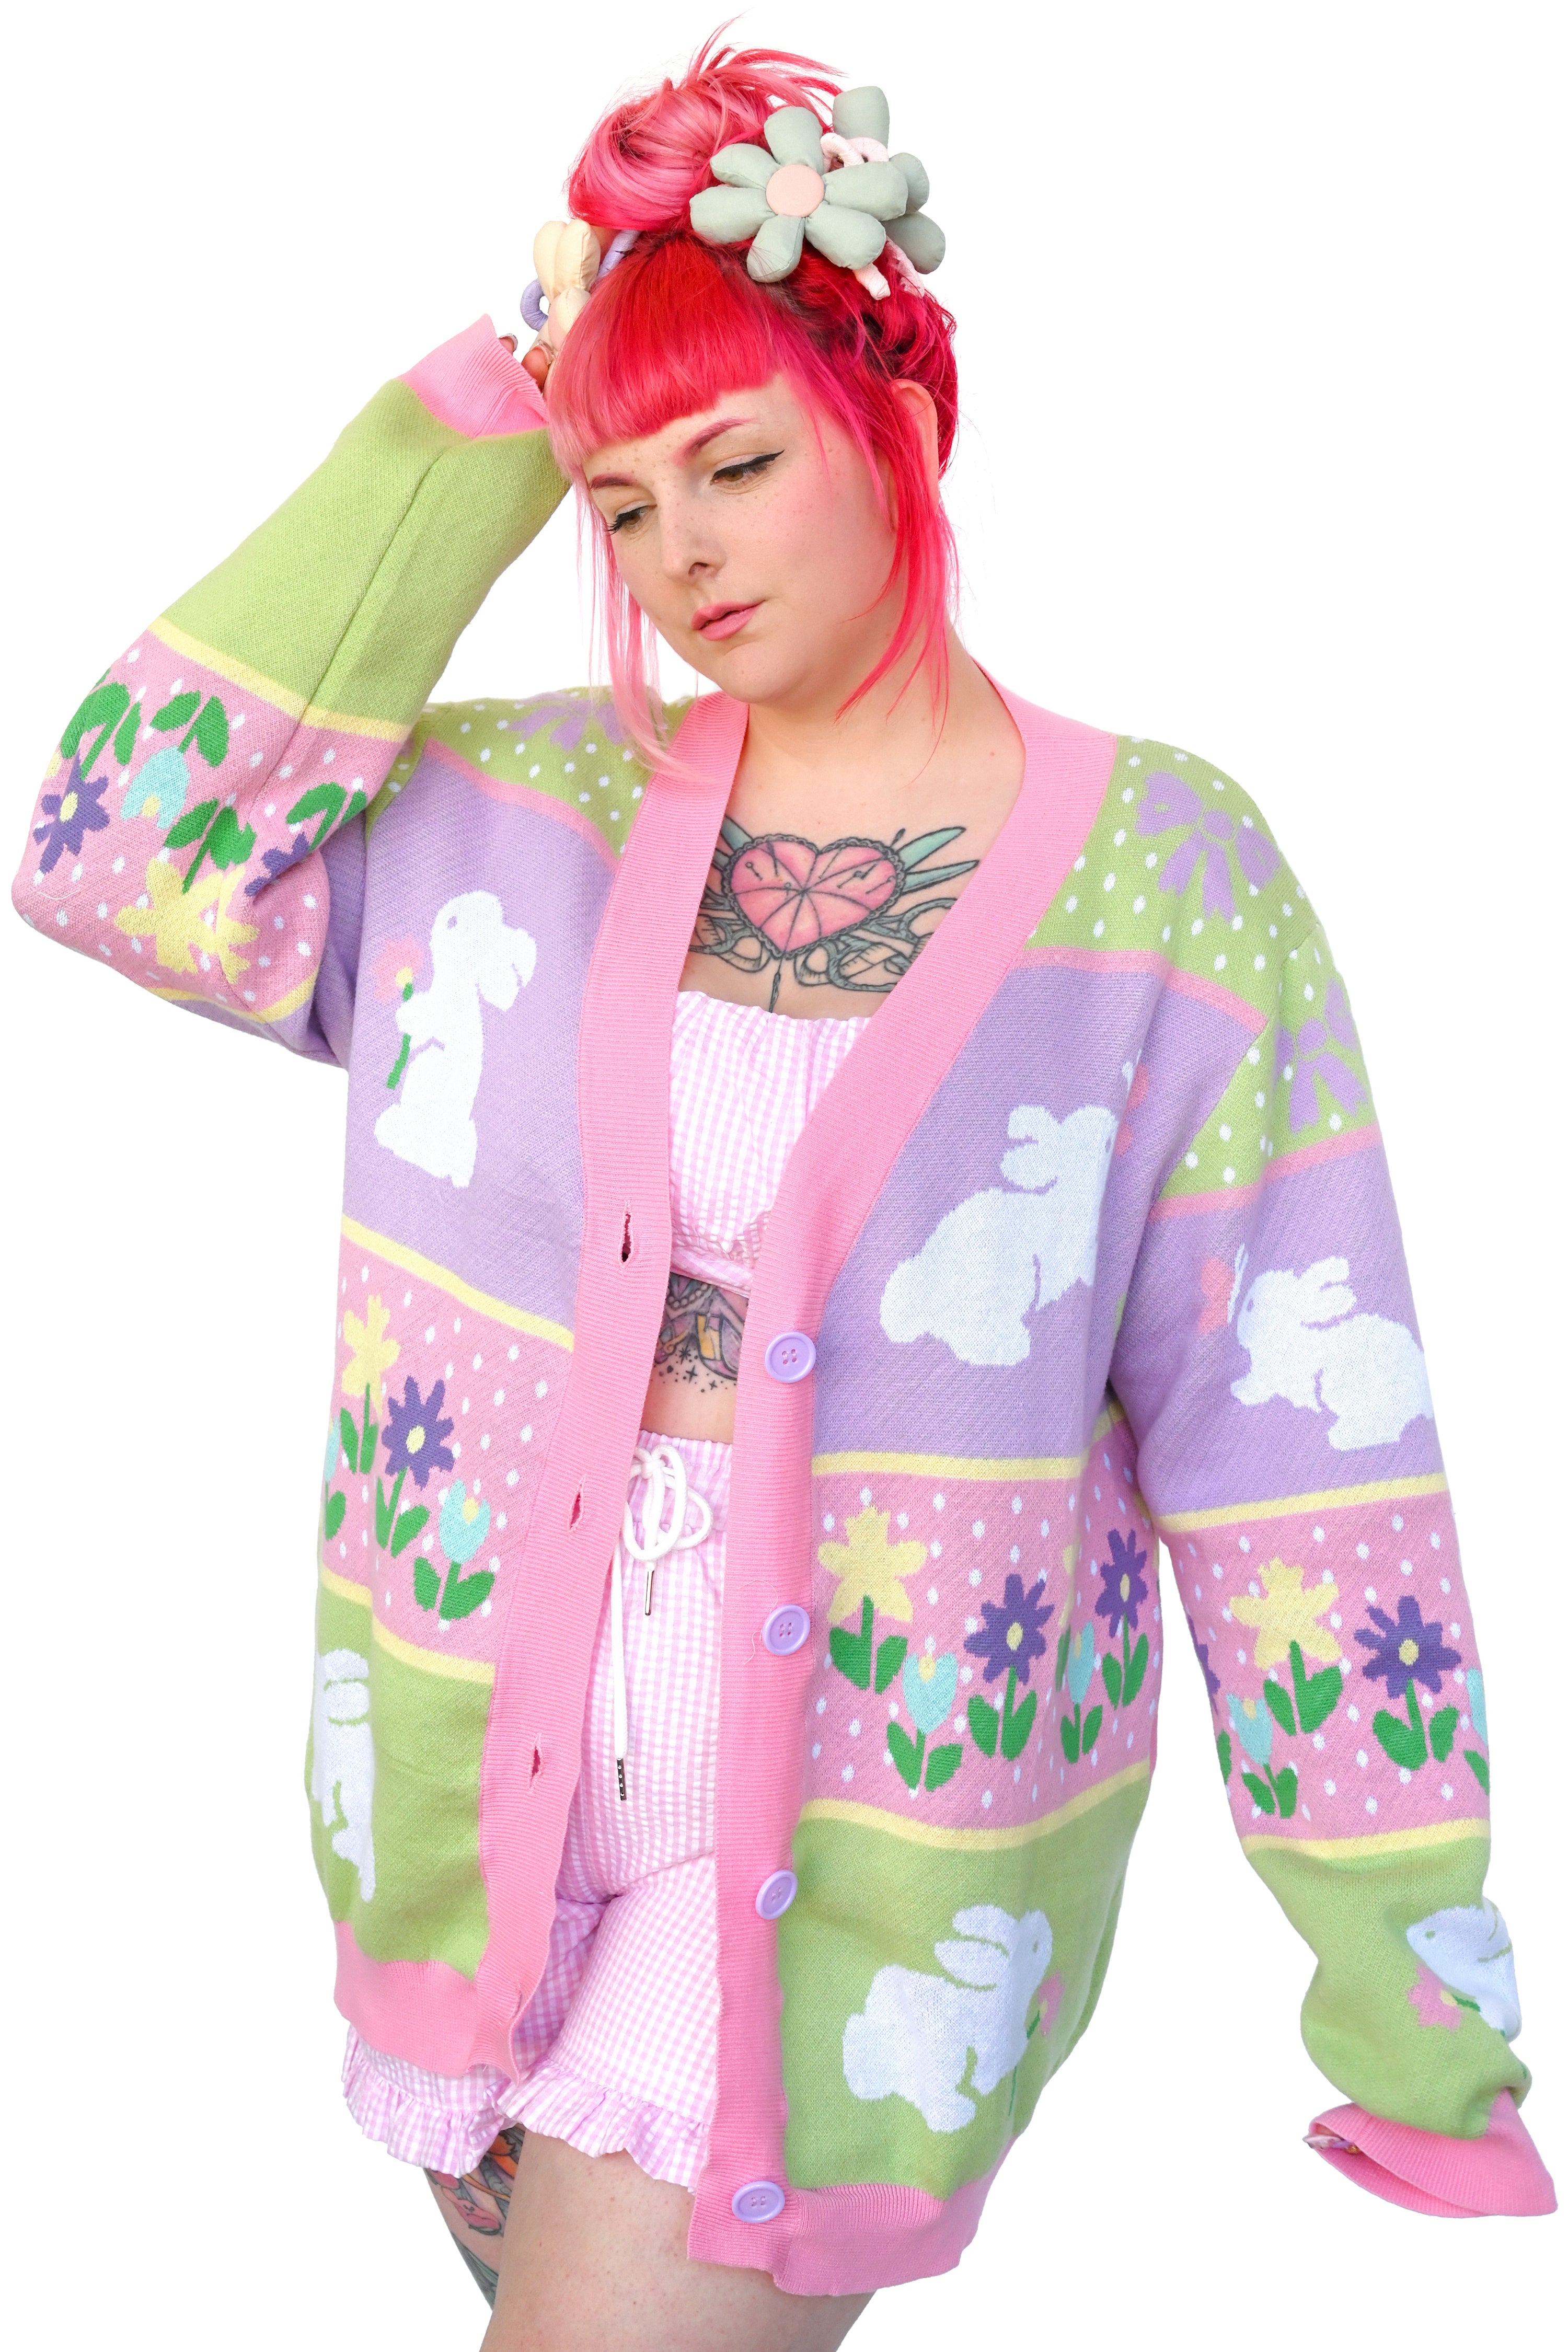 Model wearing lightweight cardigan with bunnies and flowers